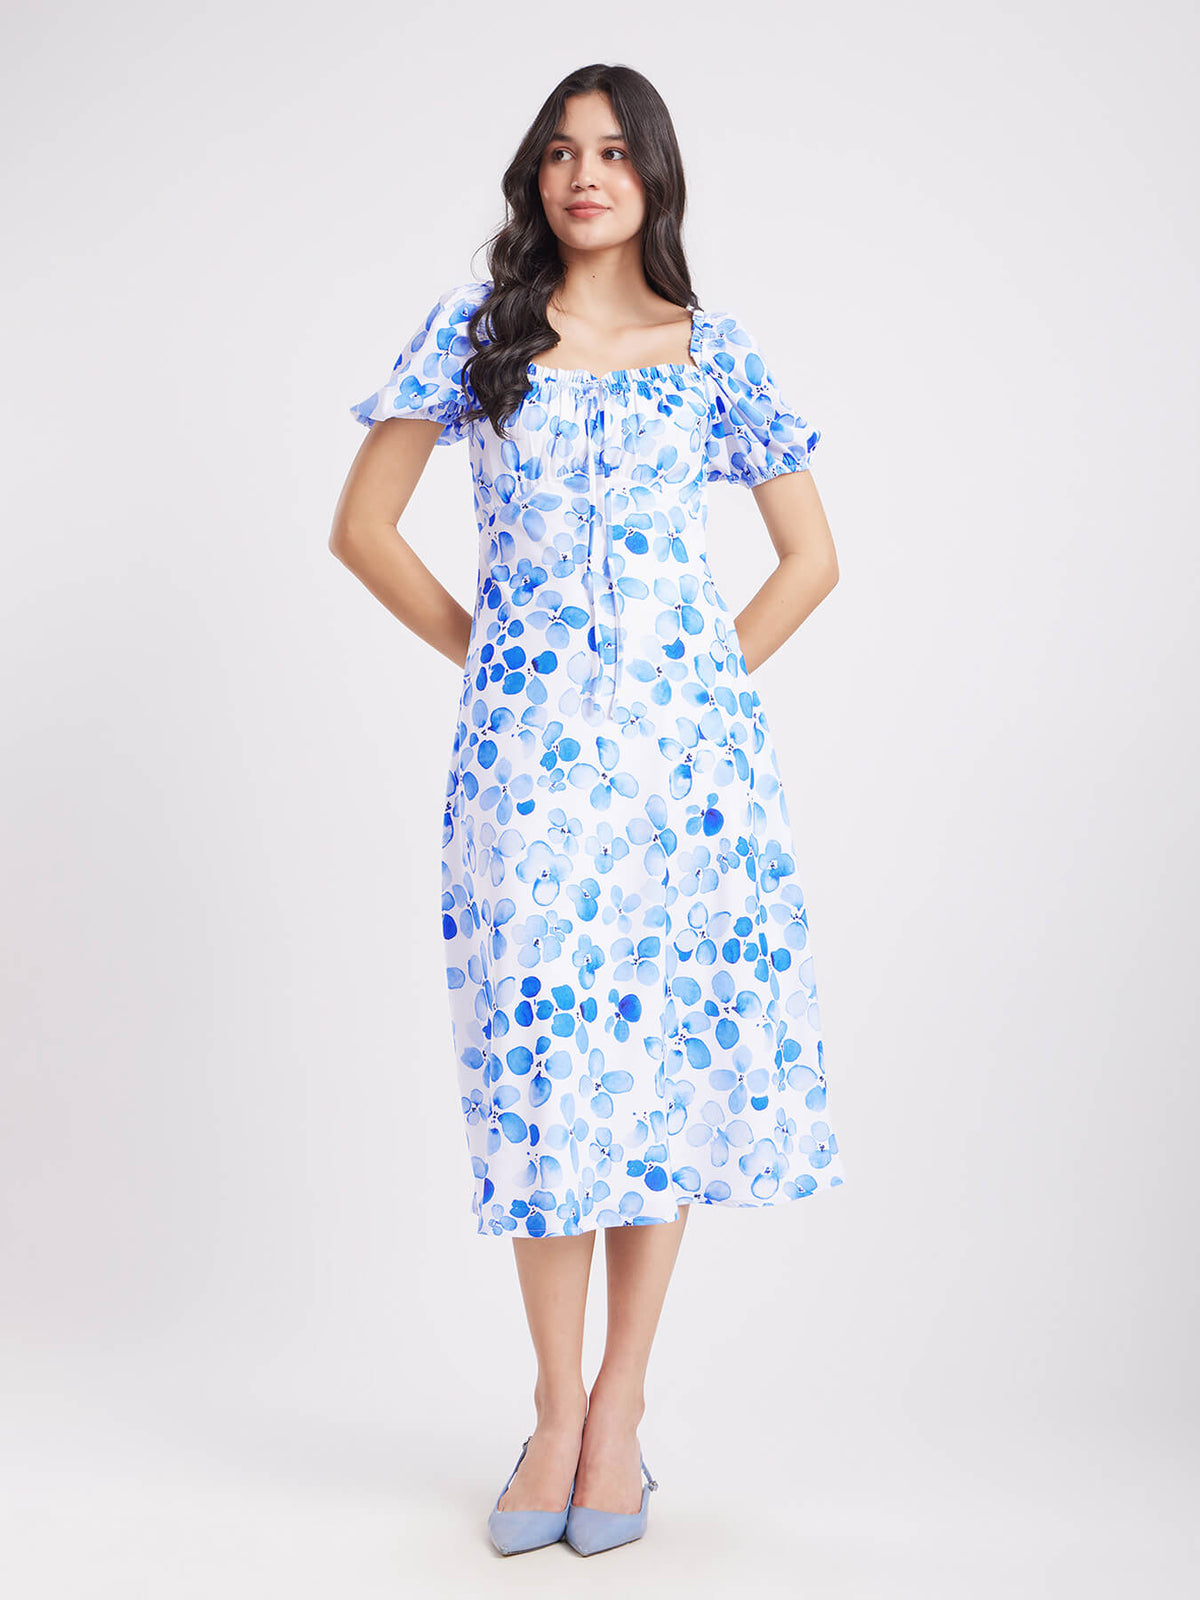 Floral Fit And Flare Dress - Blue And White